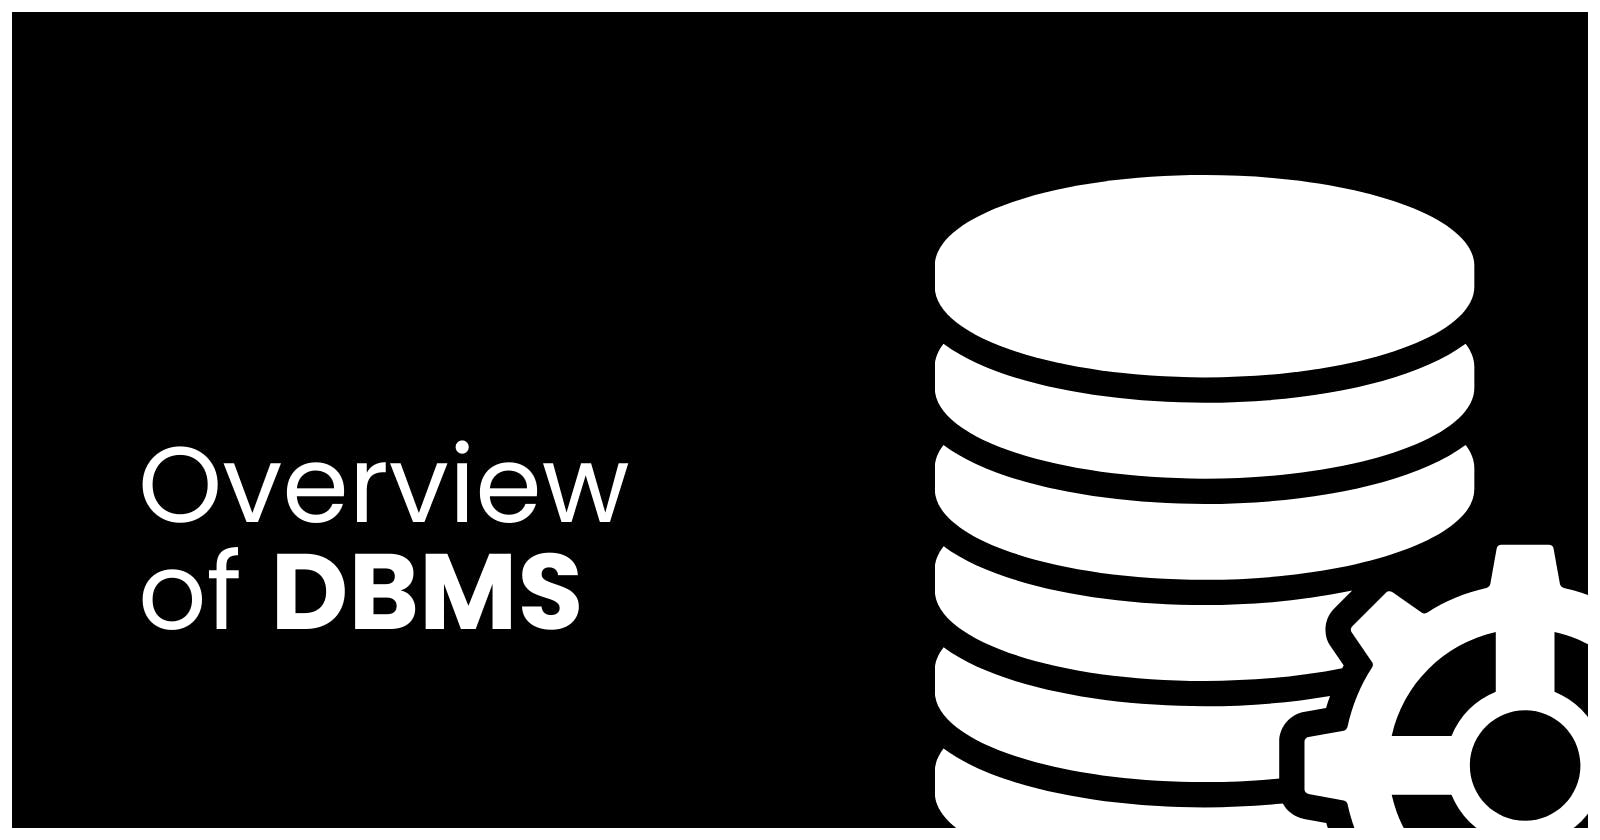 Overview of DBMS